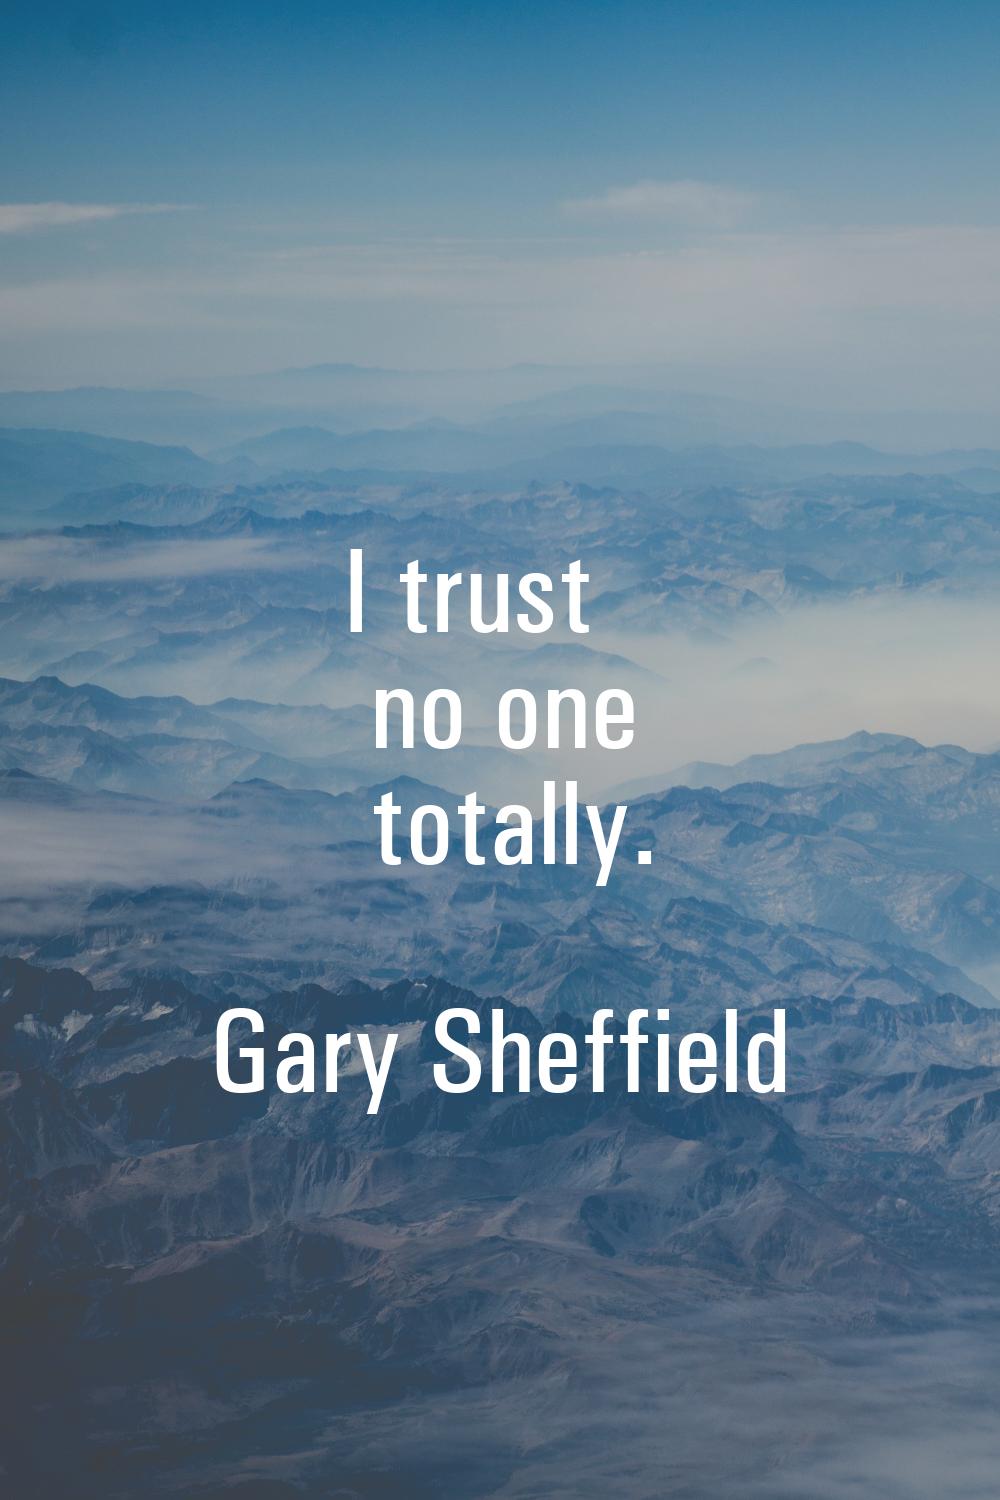 I trust no one totally.